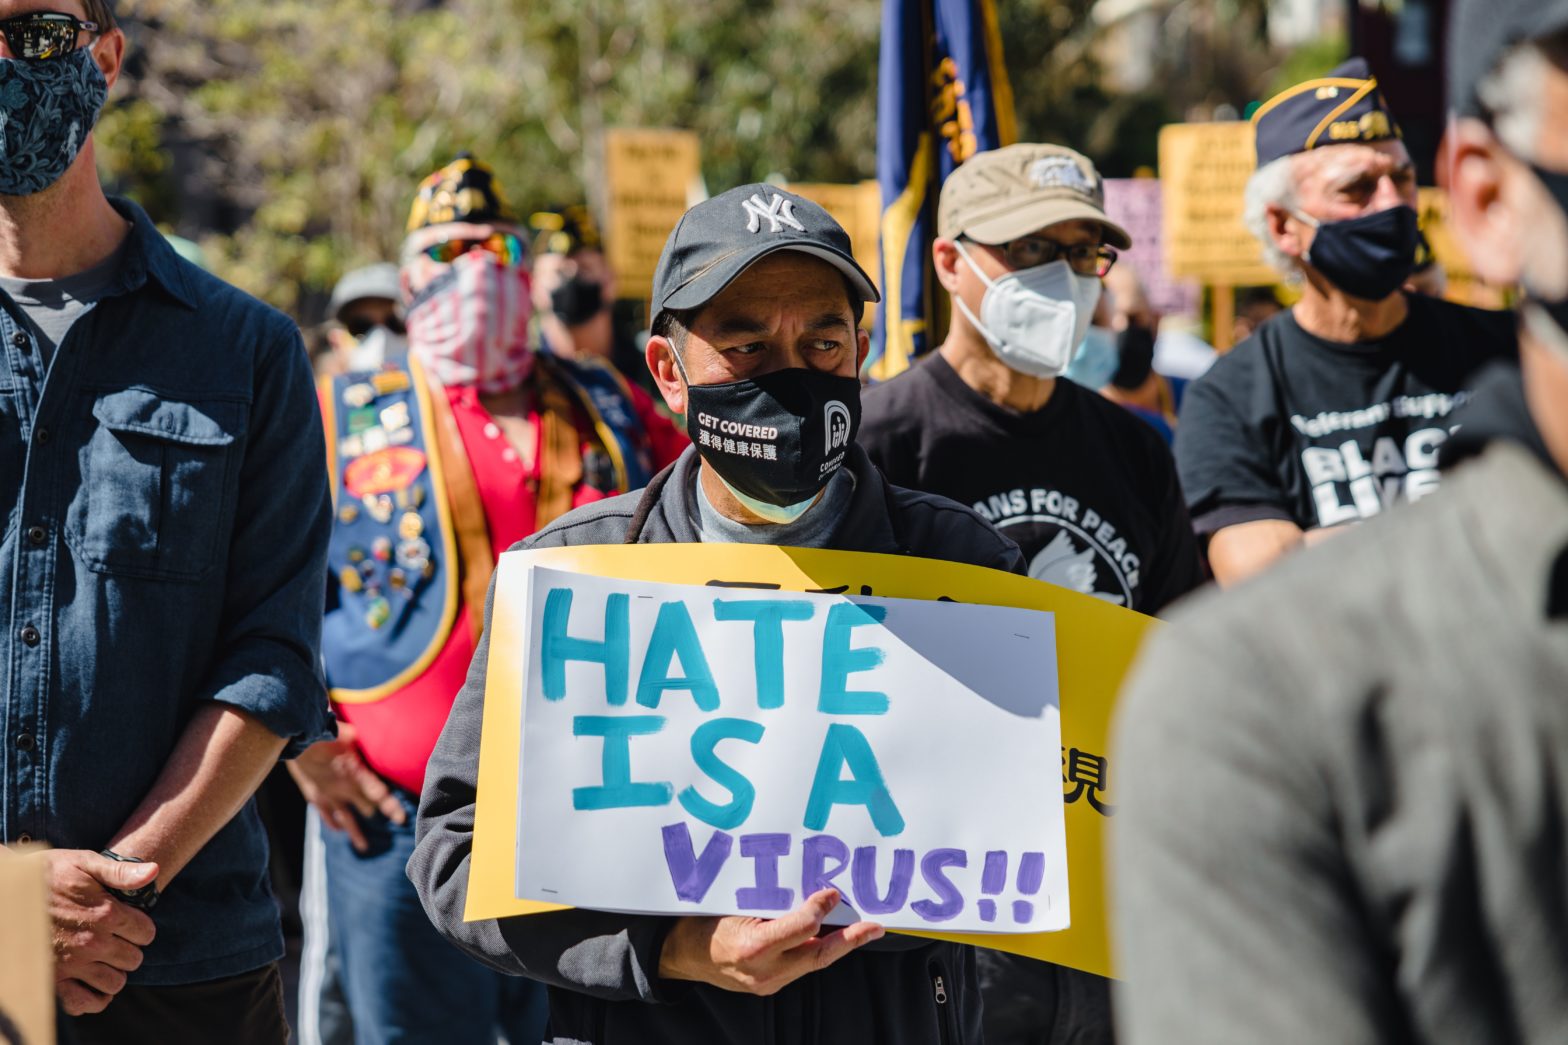 Riverside County’s Hate Crime Laws